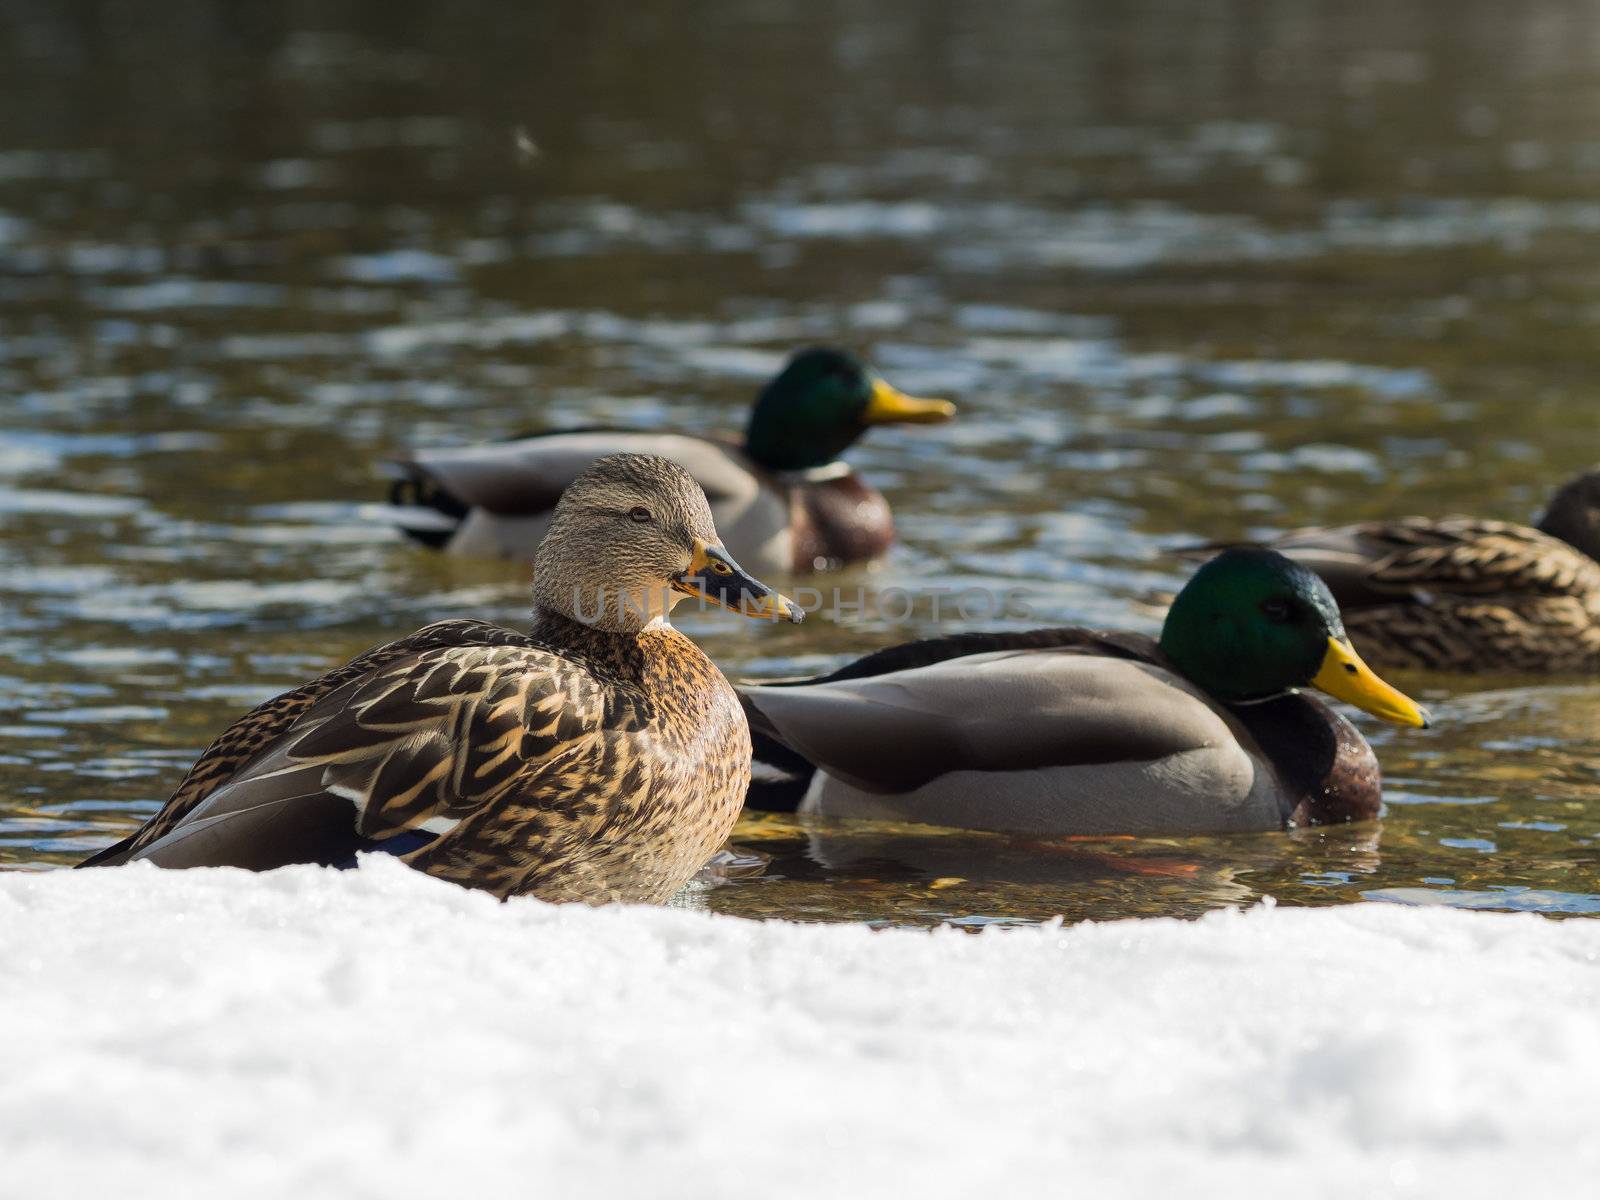 Ducks by the river by Talanis